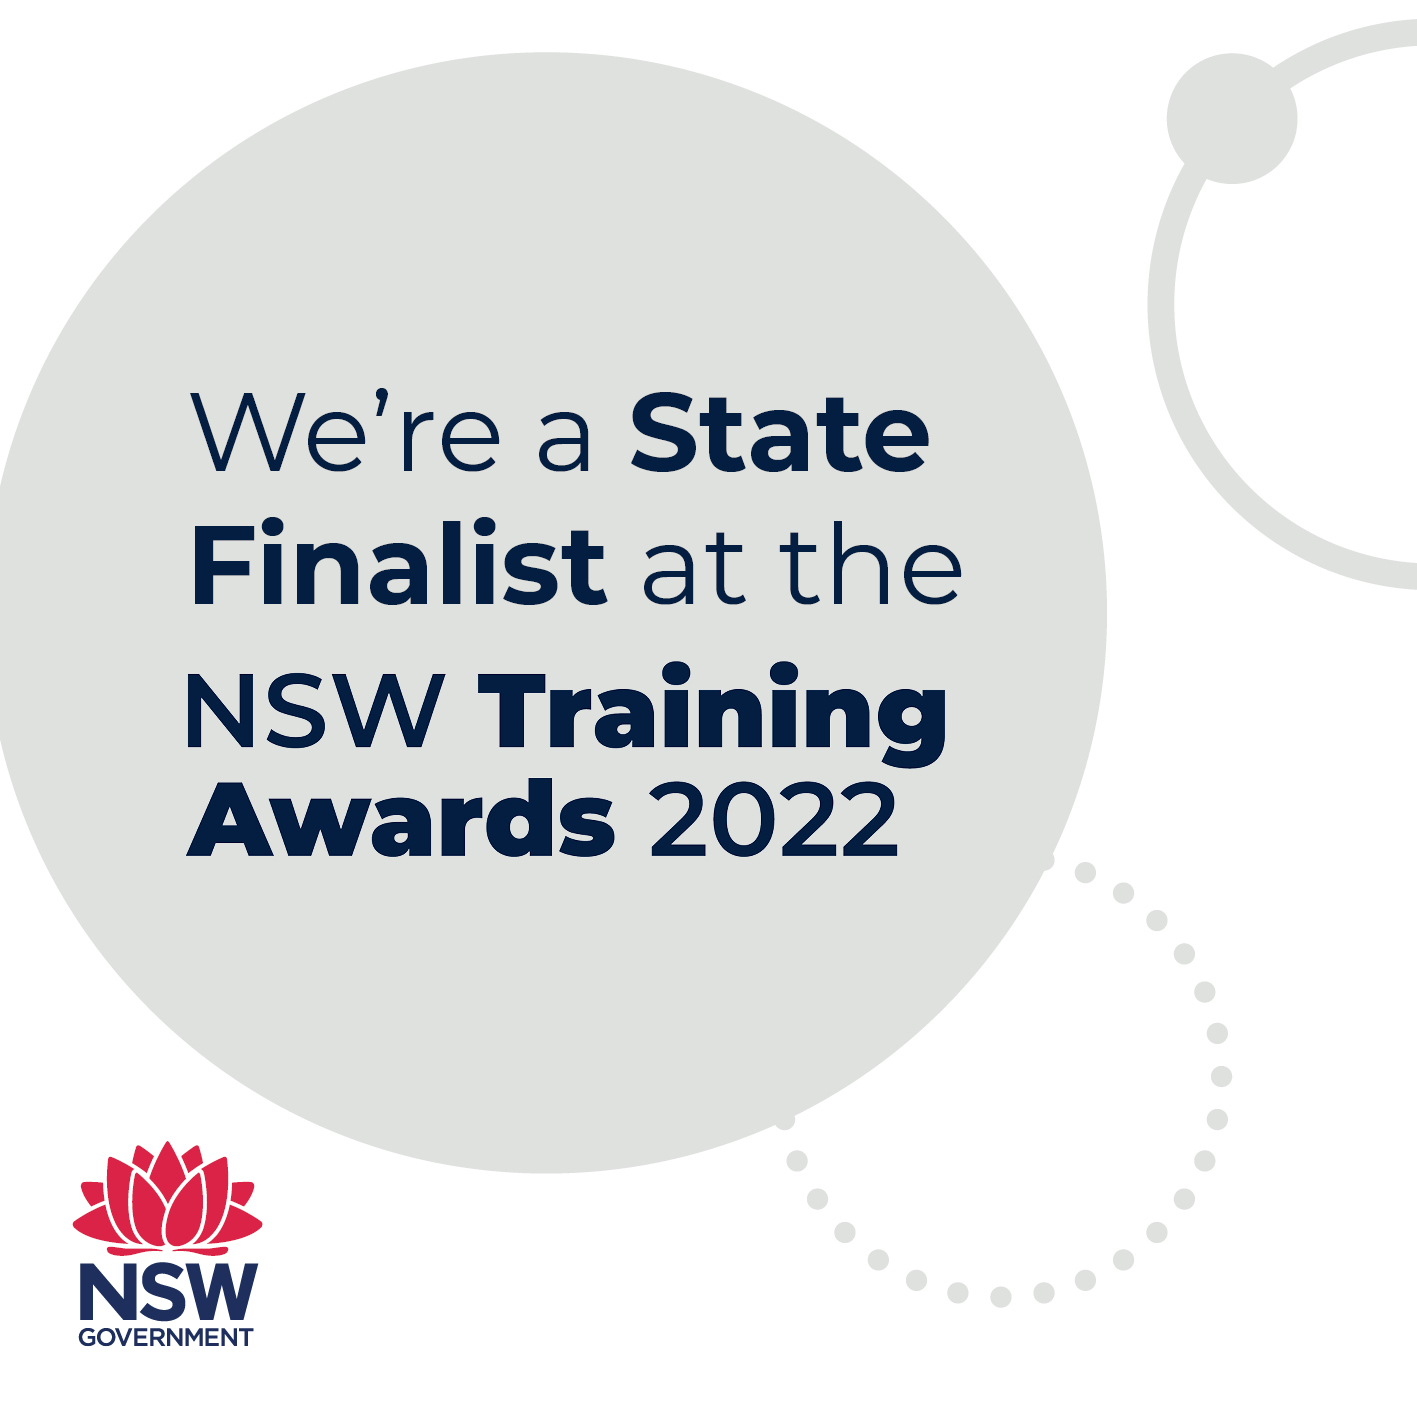 We're a State Finalist at the NSW Training Awards 2022